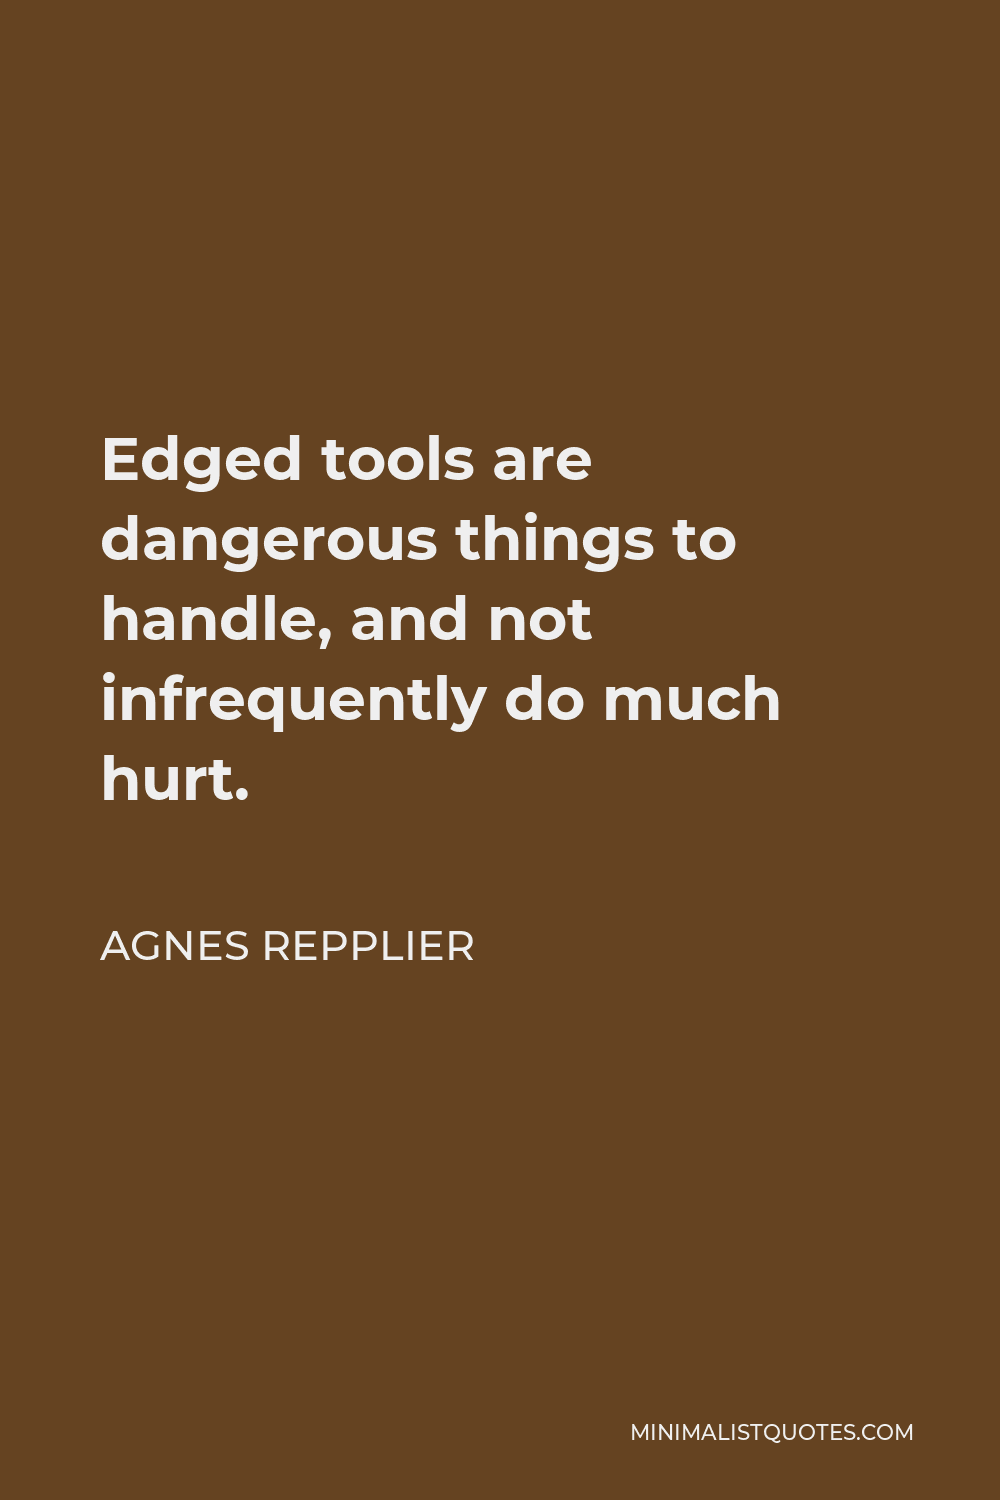 Agnes Repplier Quote - Edged tools are dangerous things to handle, and not infrequently do much hurt.